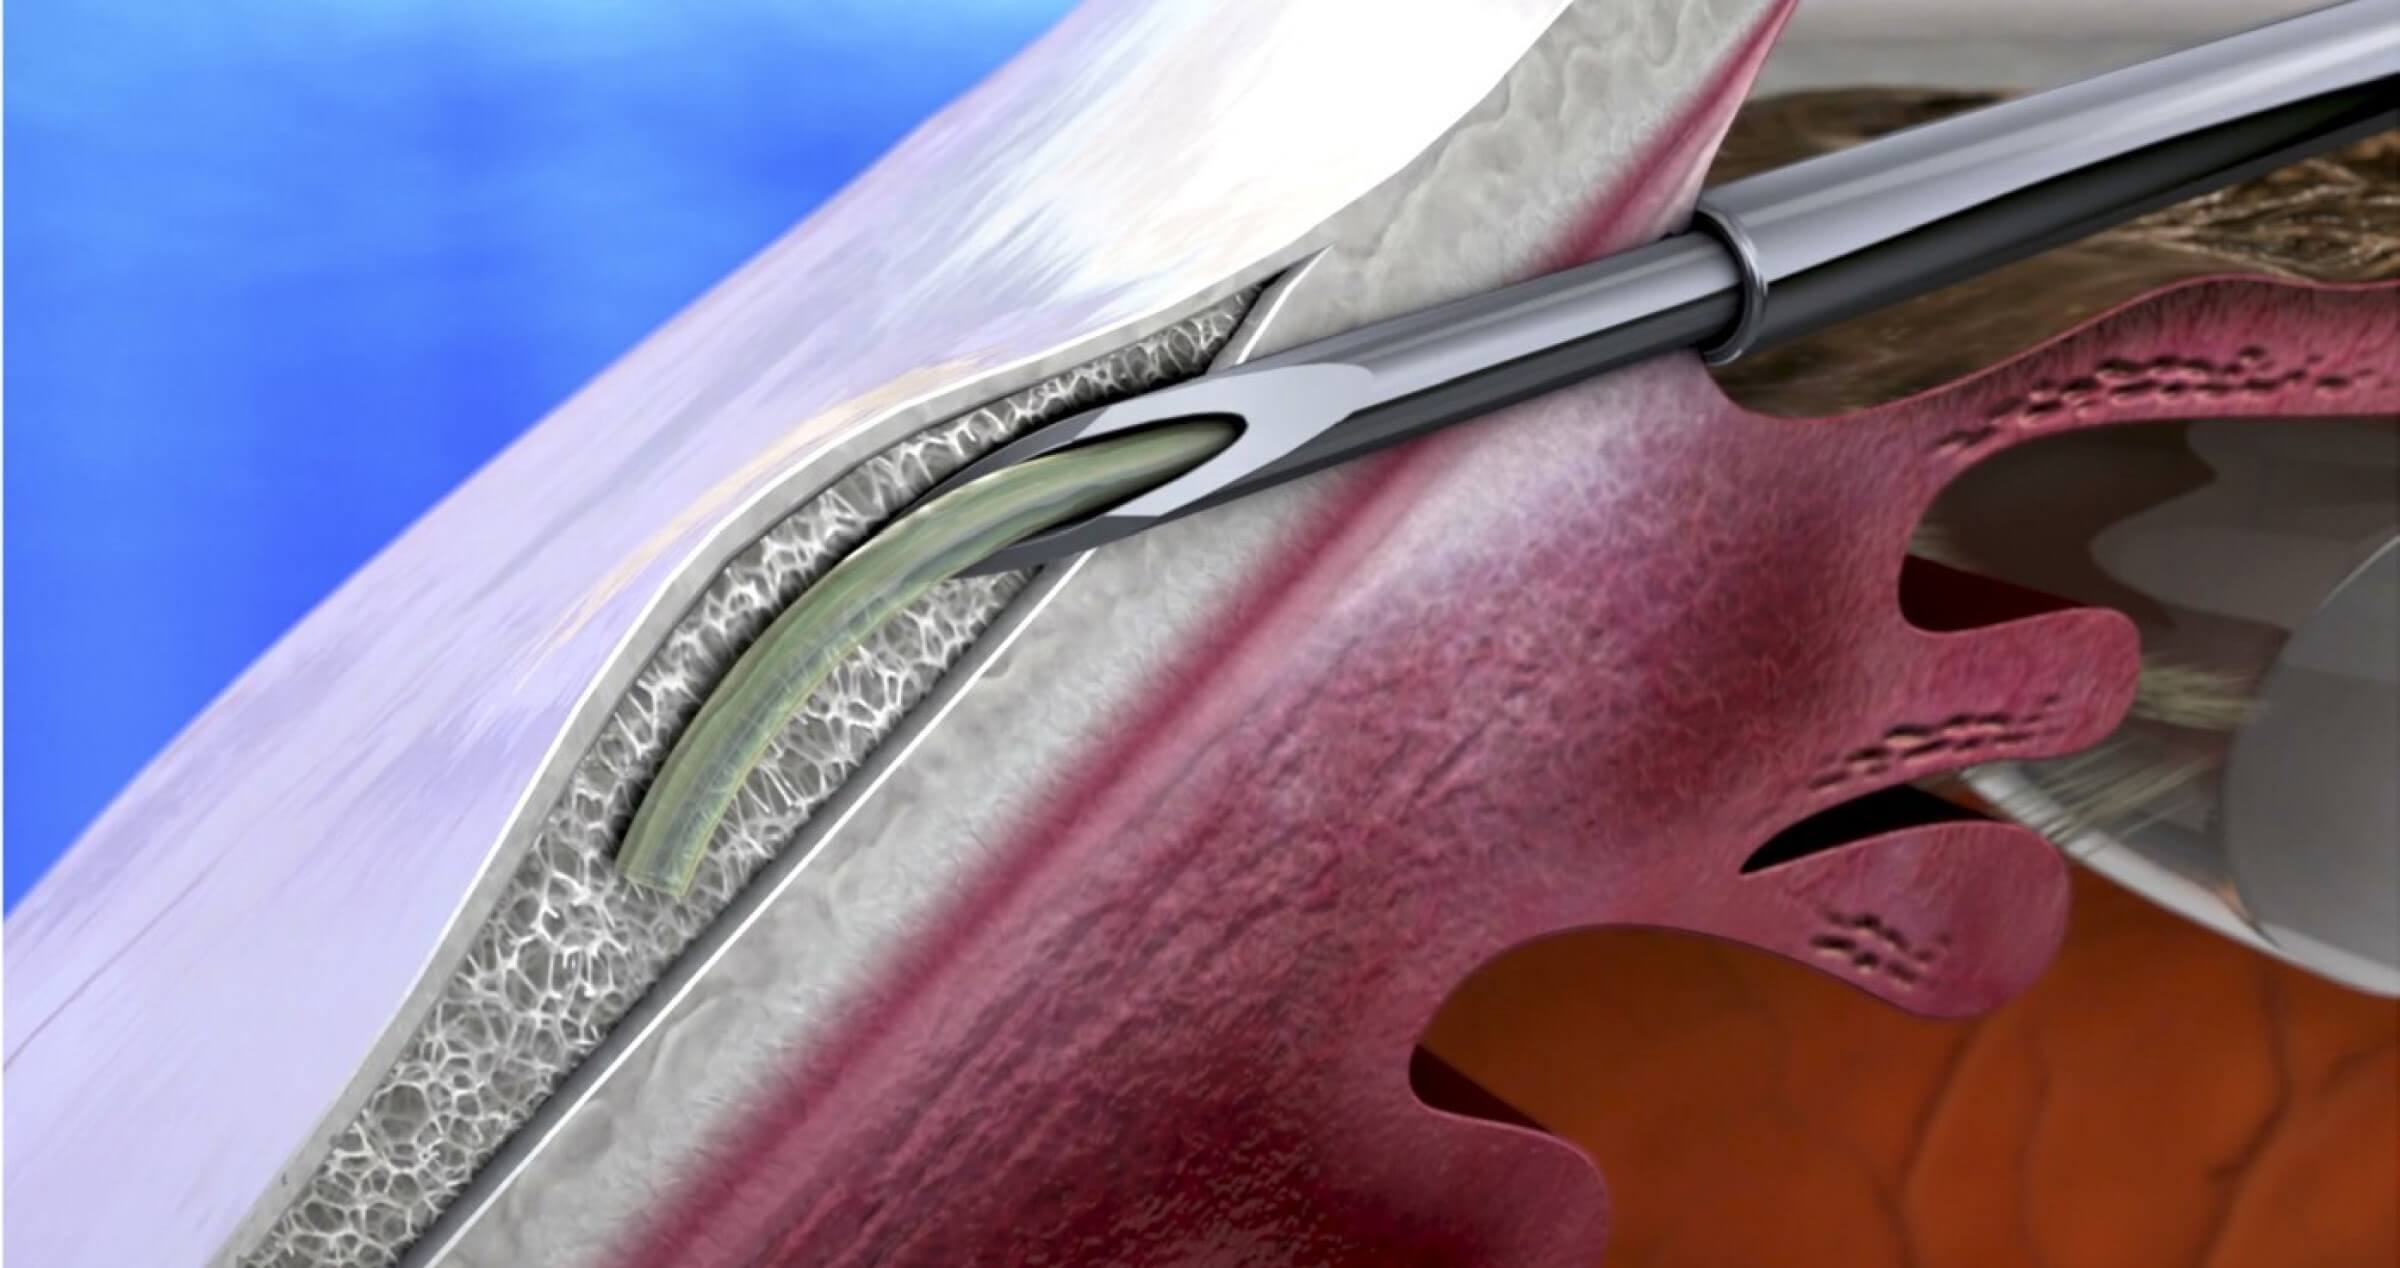 An illustrative cross section of the eye showing the Xen Gel Stent being implanted under the conjunctiva of the eye, 